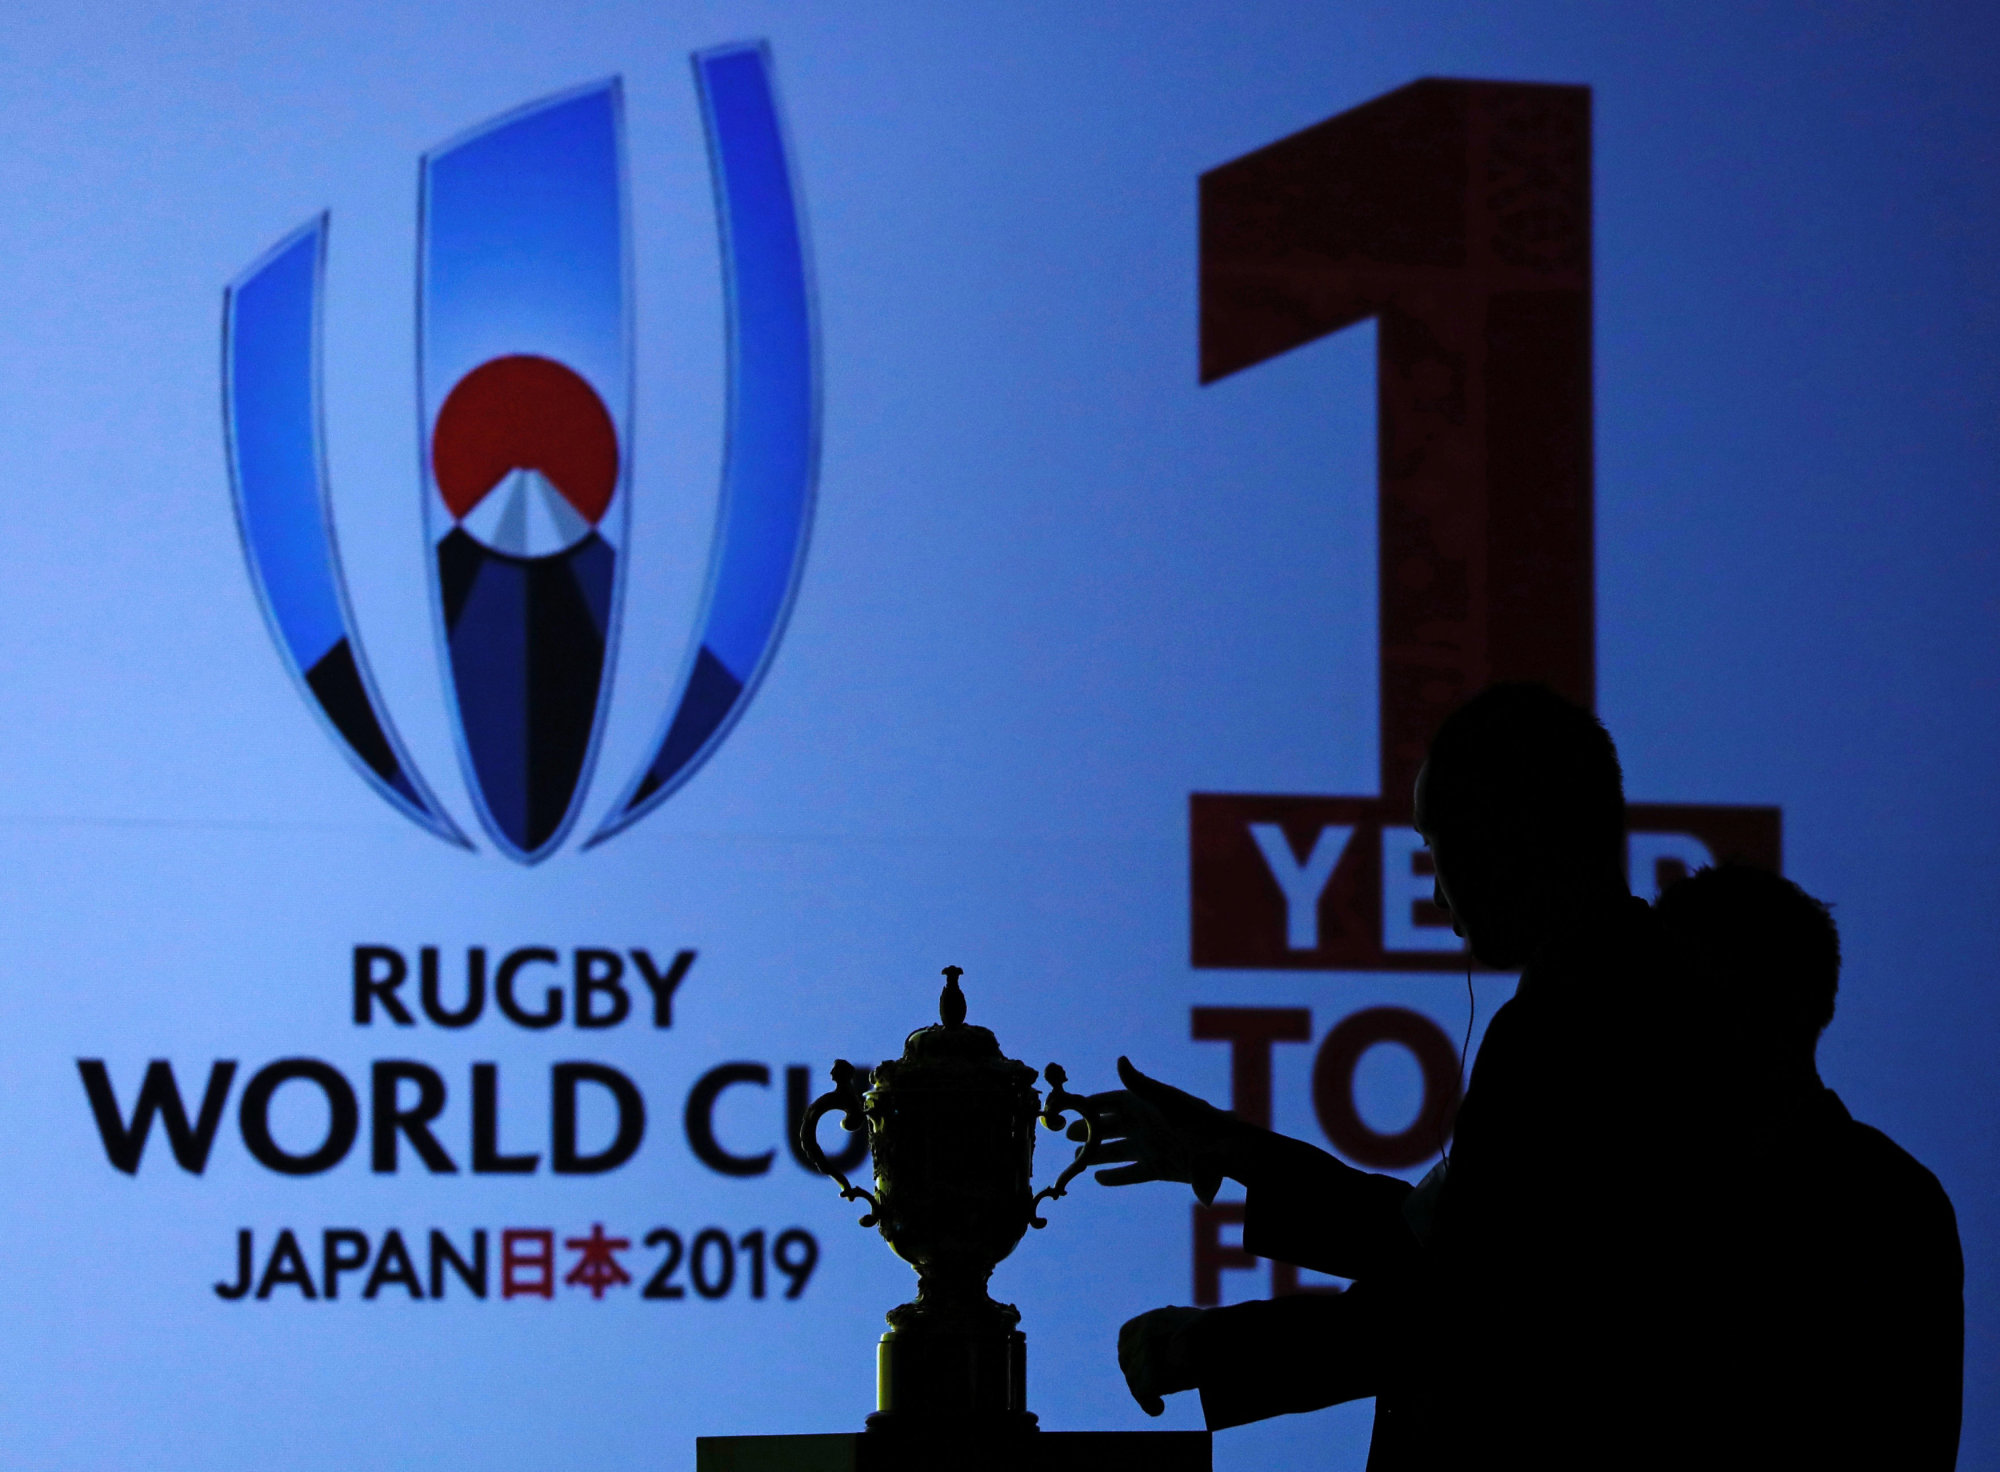 Rugby World Cup to get unprecedented coverage on Japanese TV